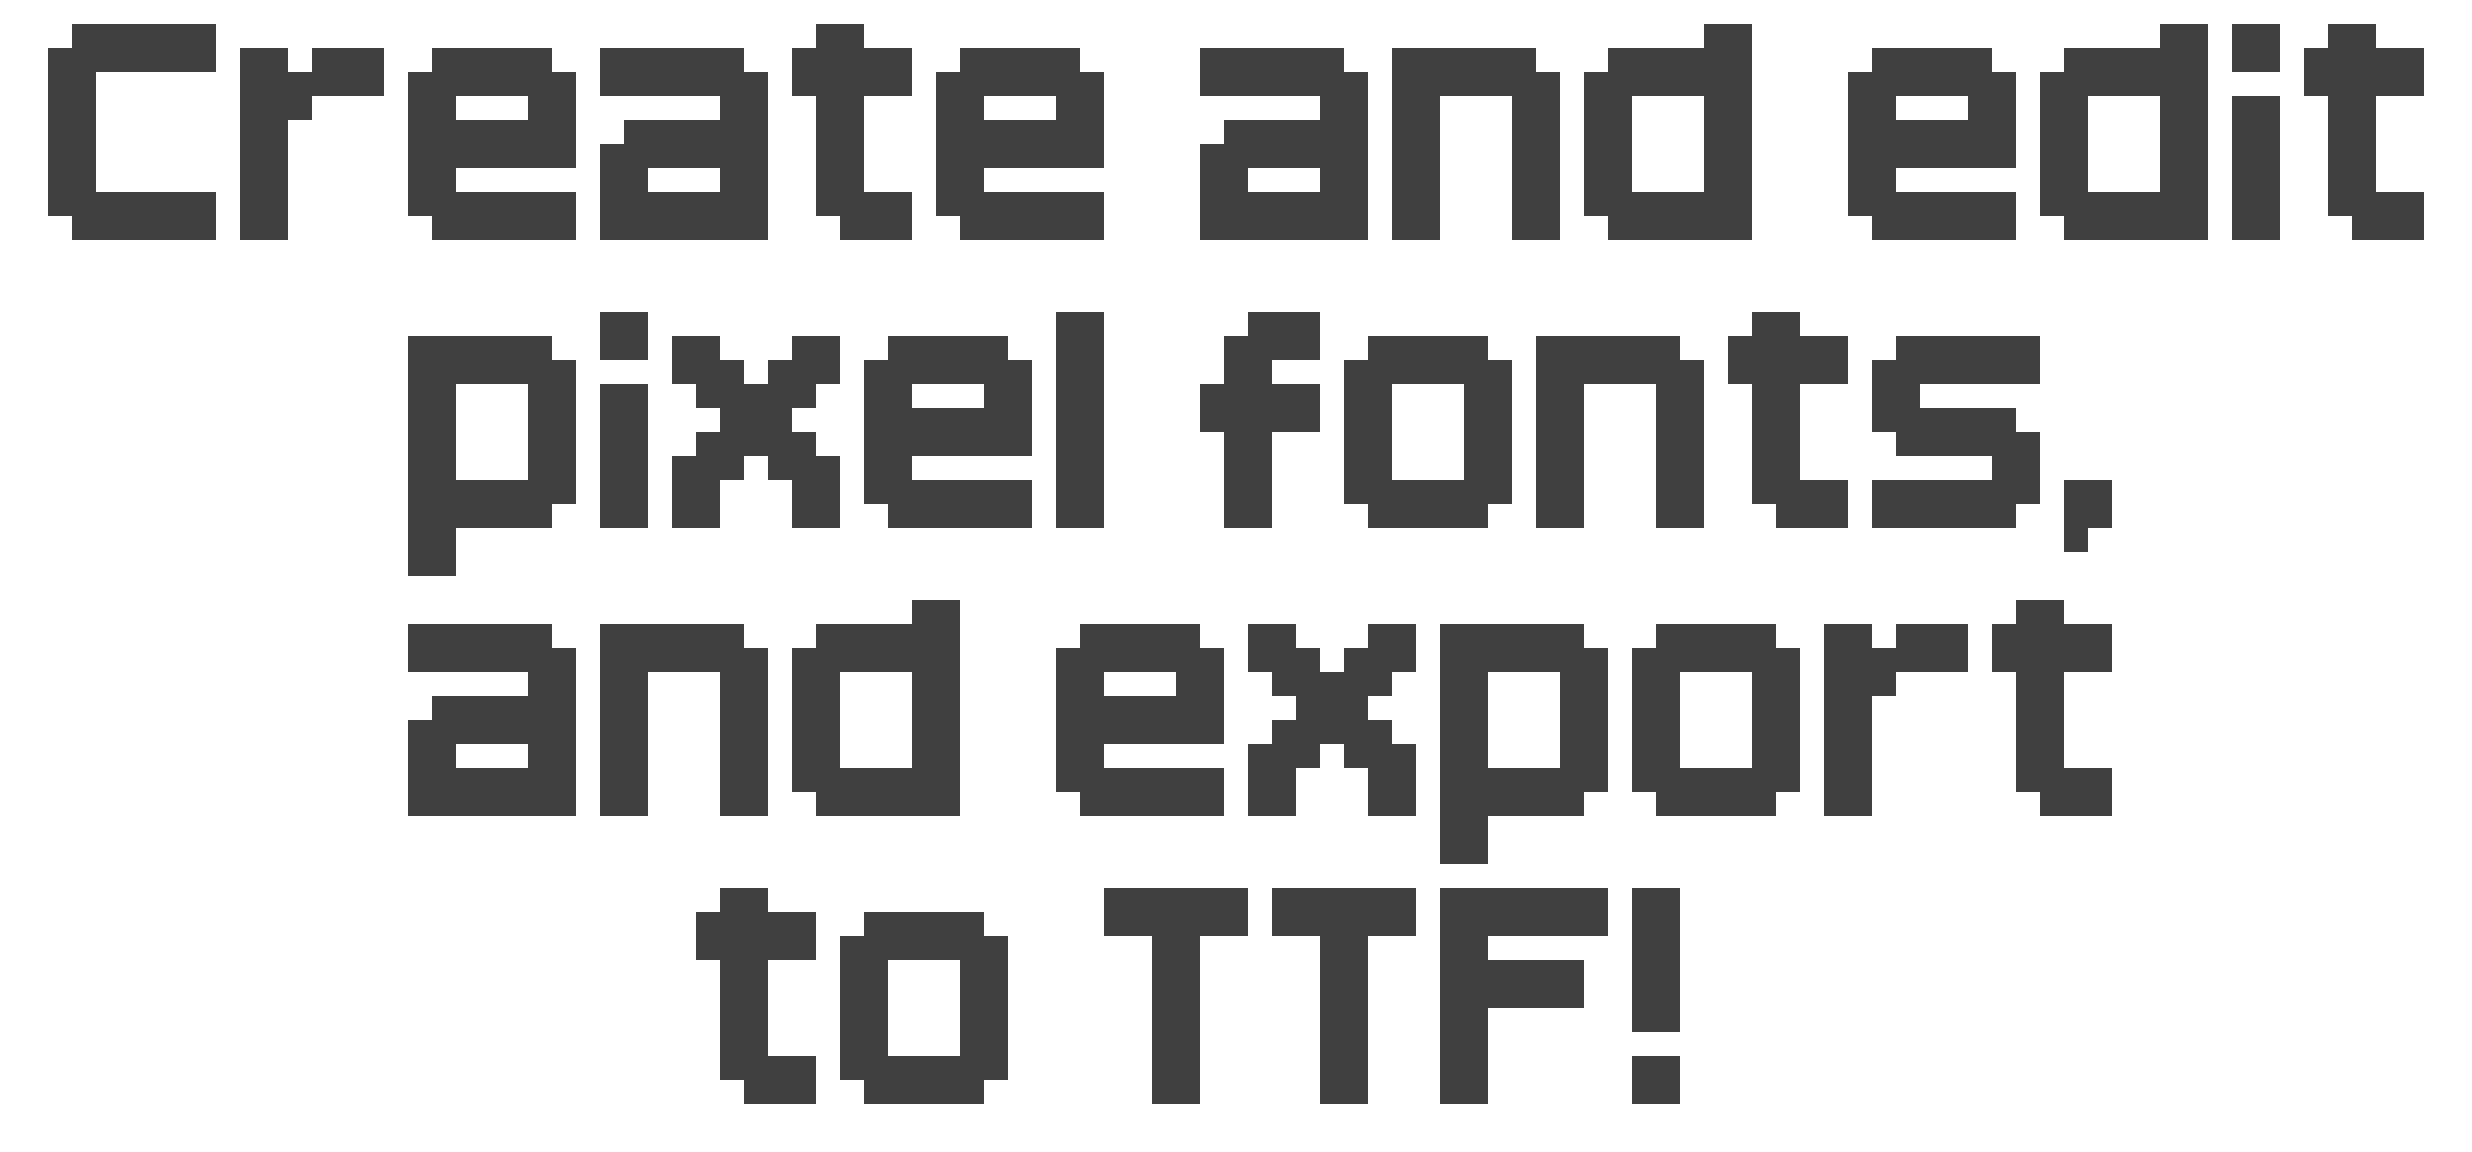 Create and edit pixel fonts, and export to TTF!